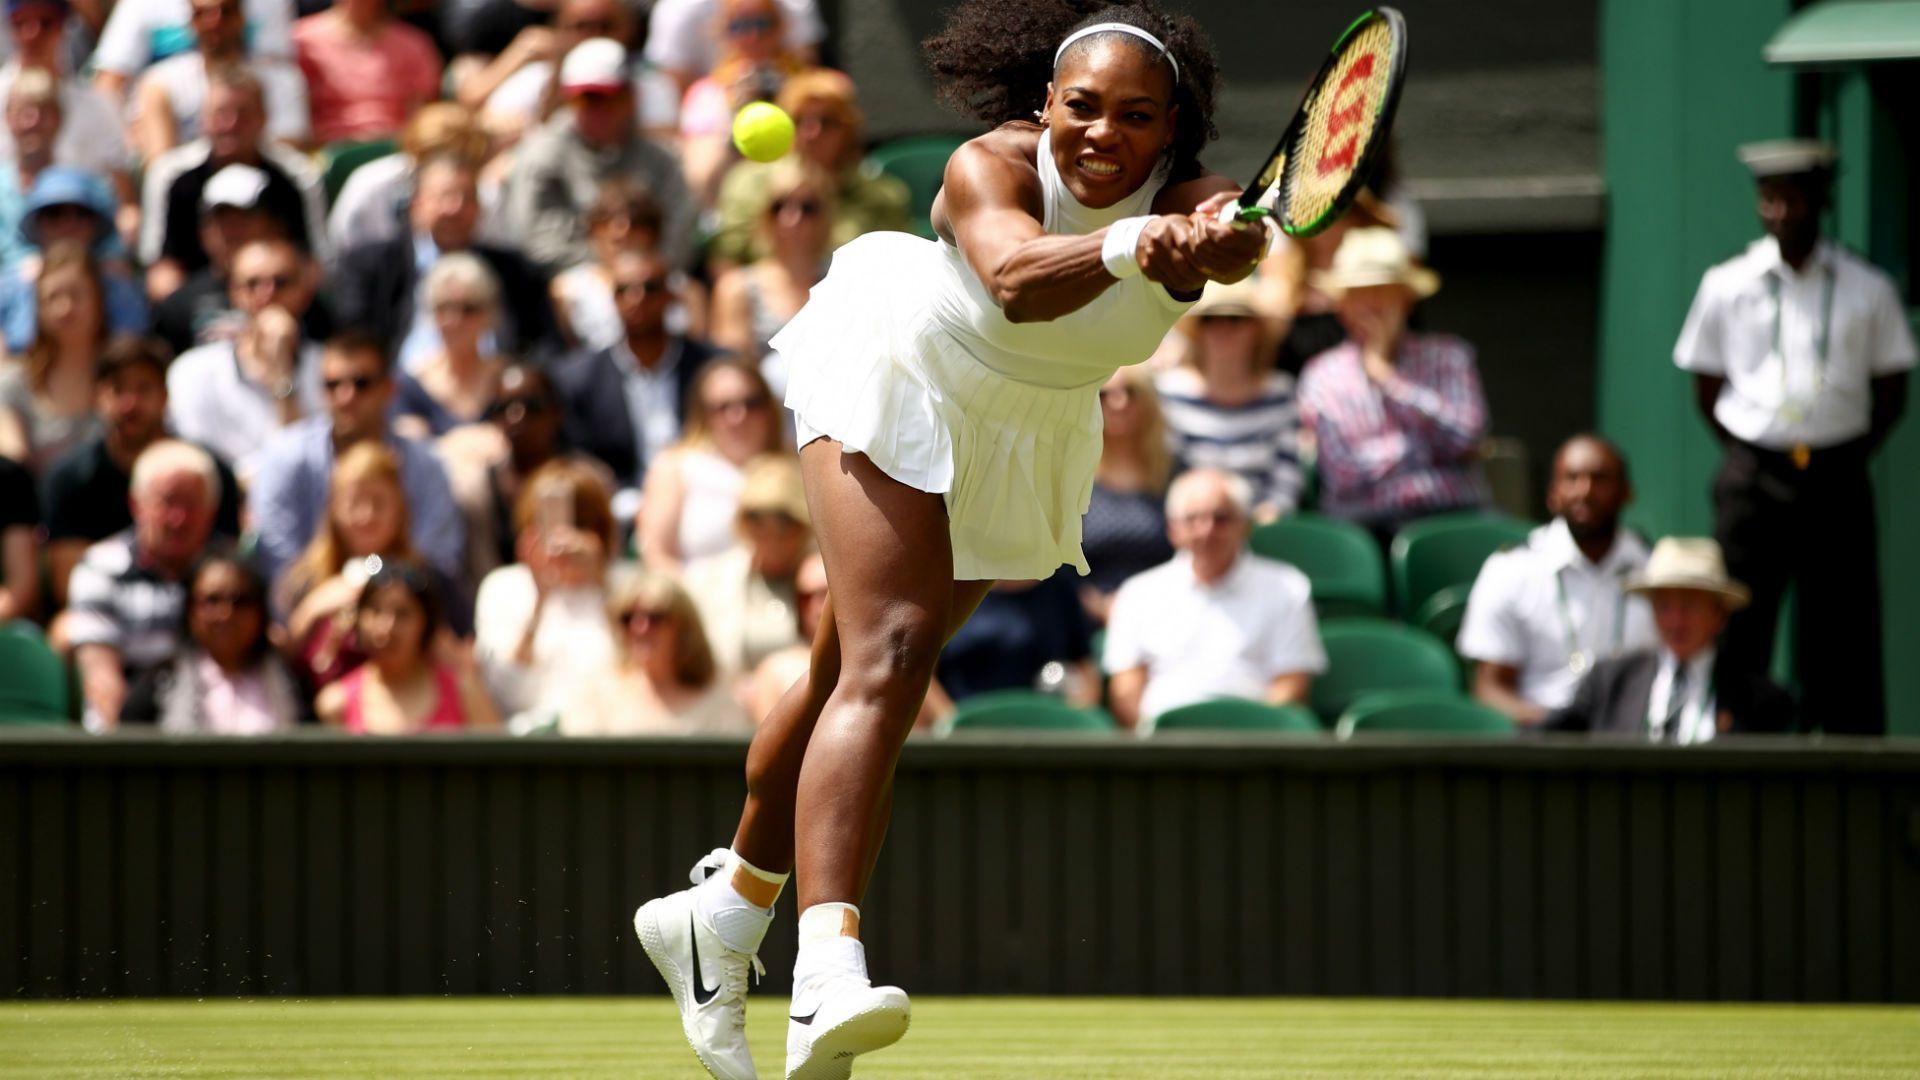 Wimbledon 2016: Serena Williams made to work for opening win